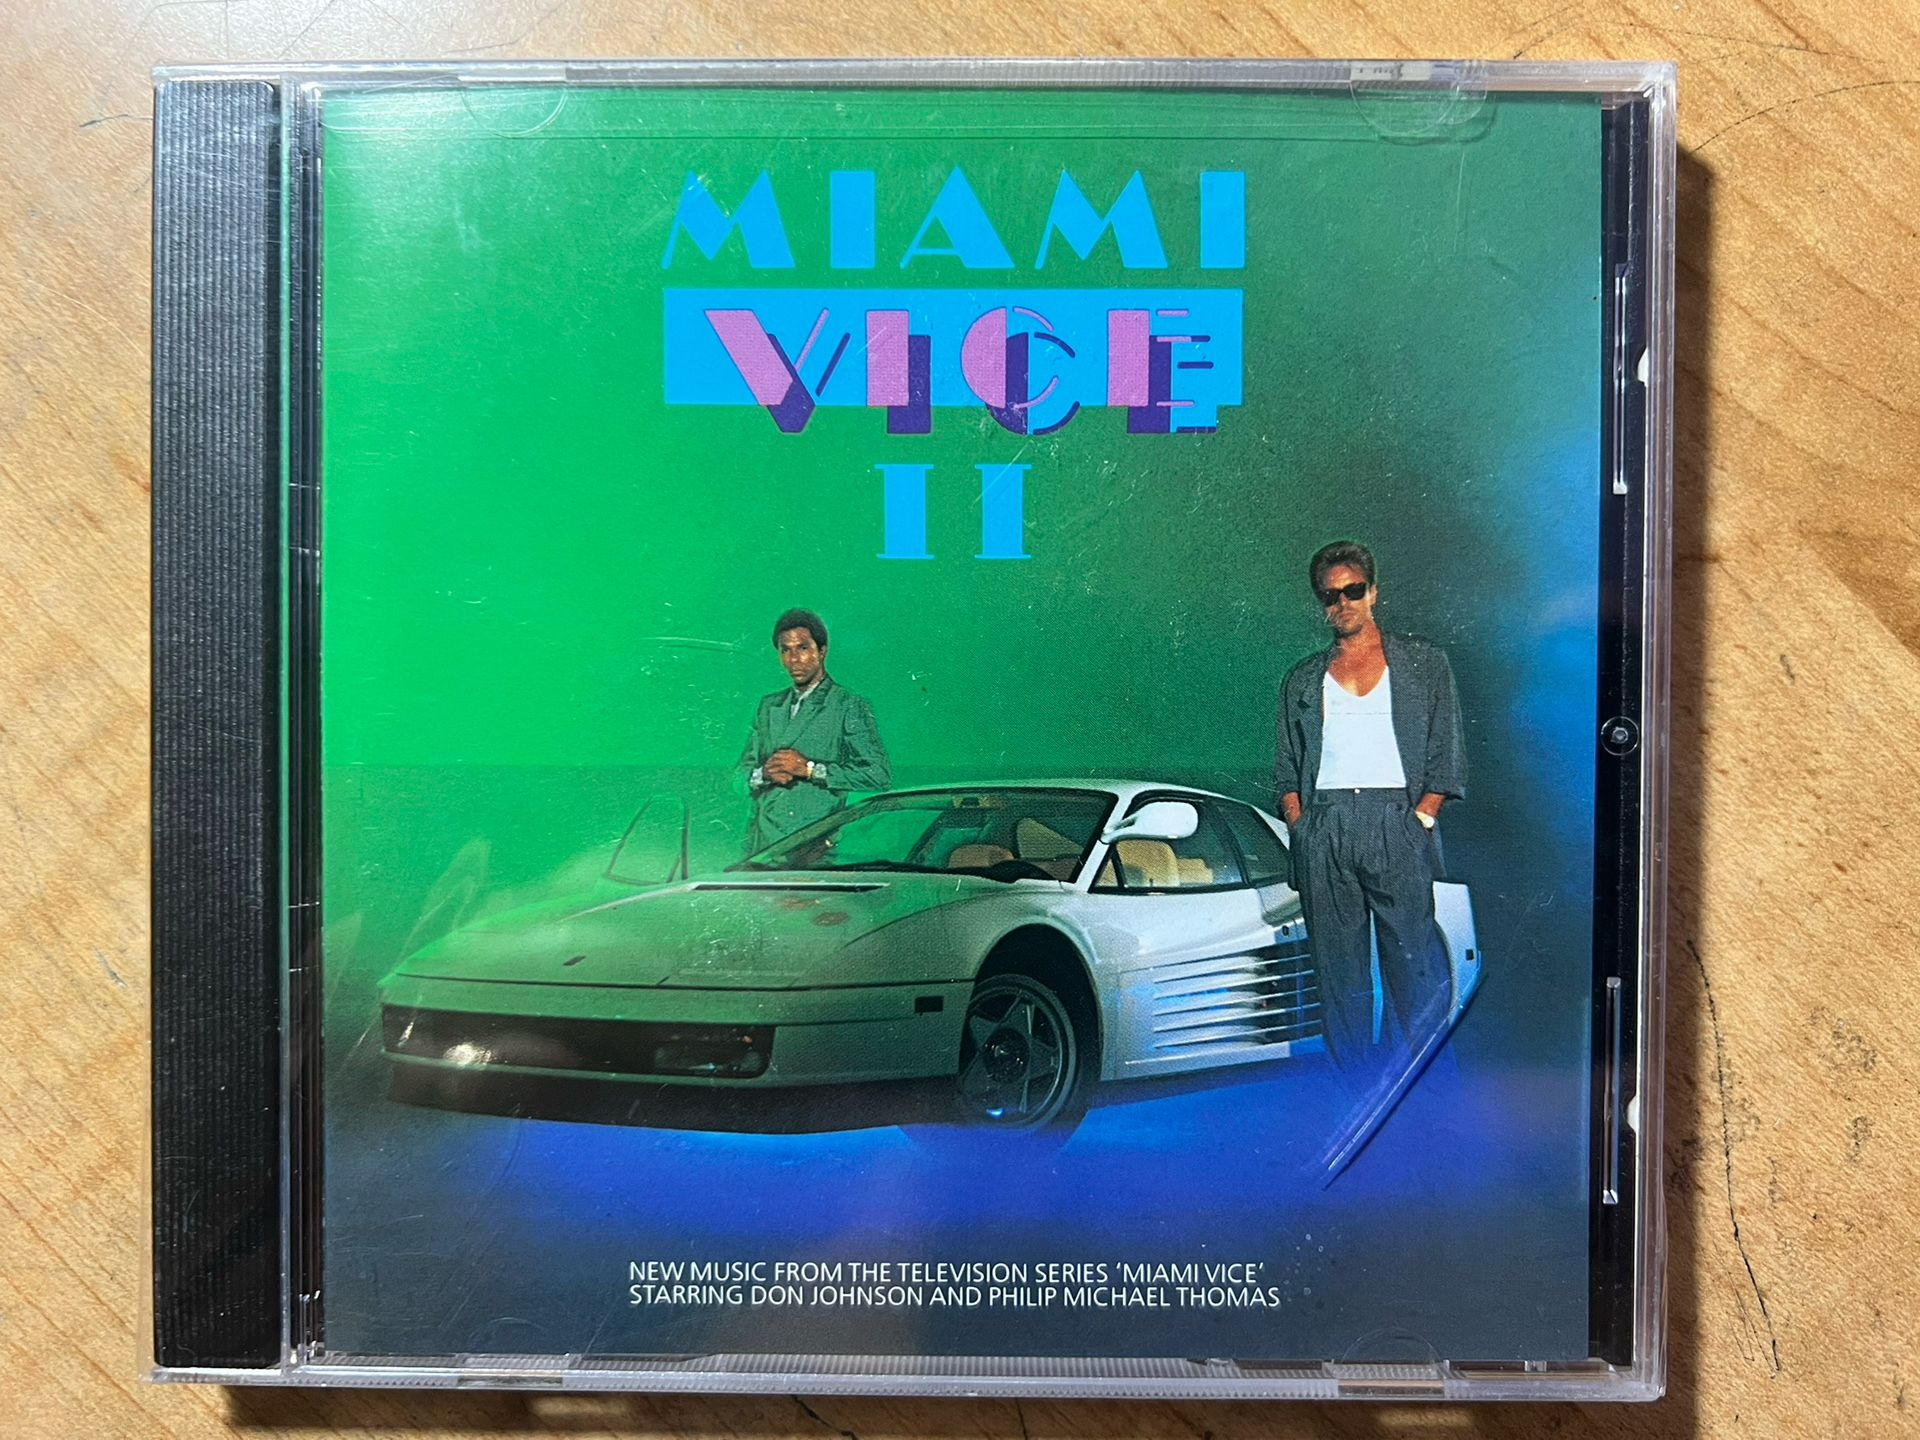 Miami Vice II: New Music from Original Soundtrack TV Series NEW SEALED